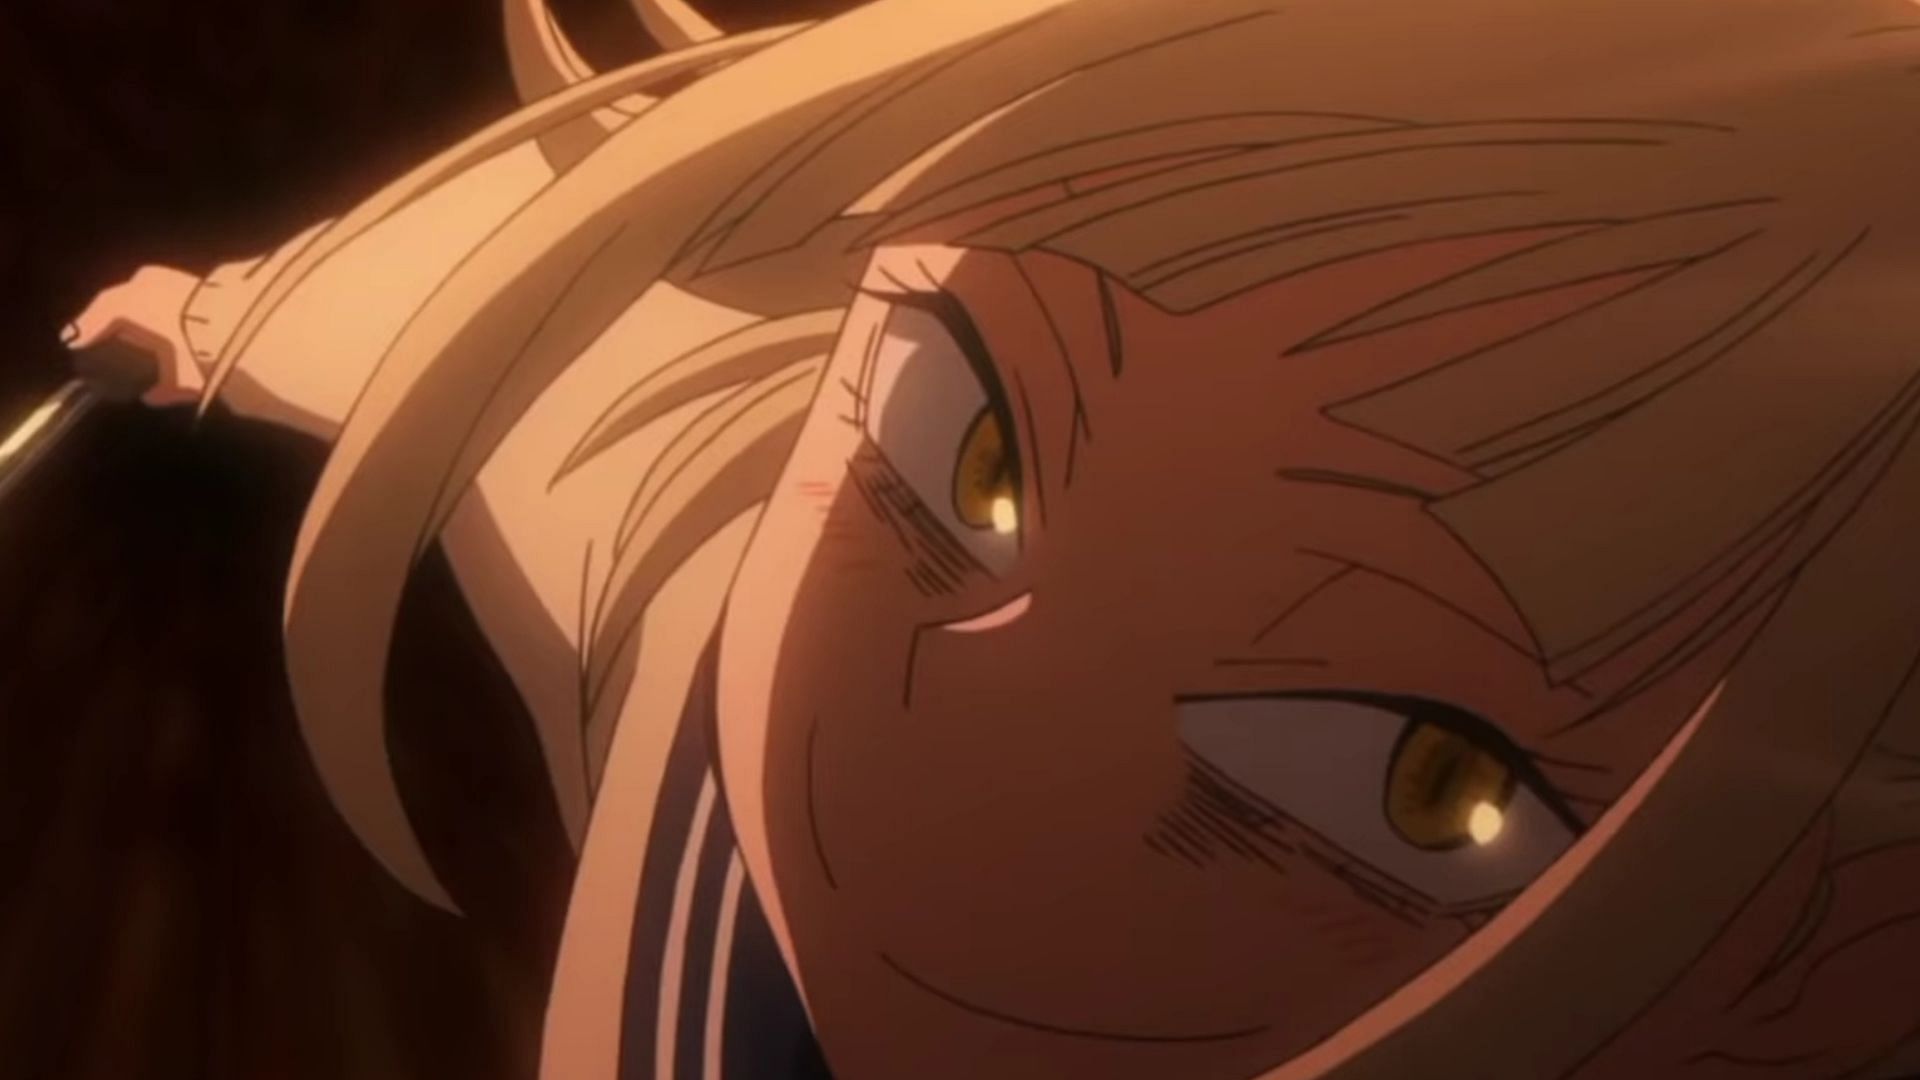 Himiko Toga in one of her first appearances in the anime (Image via Studio Bones)